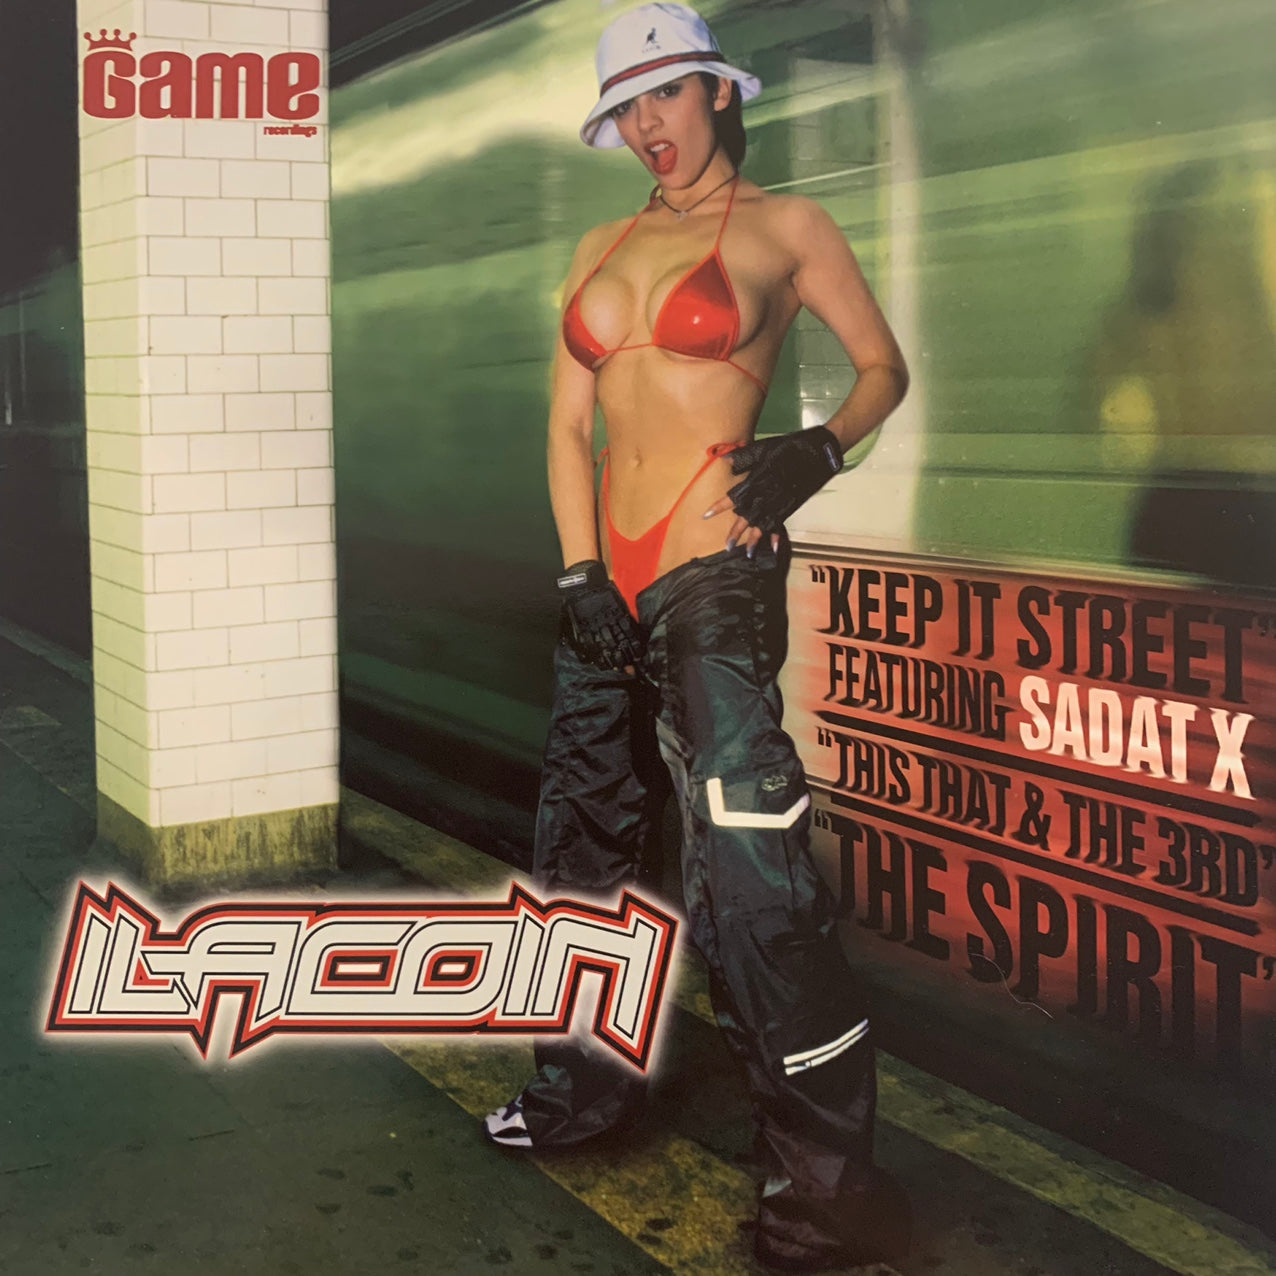 Ilacoin “Keep It Street” Feat Sadat X / “The Spirit” / “This That & The 3rd” 7 Track 12inch Vinyl